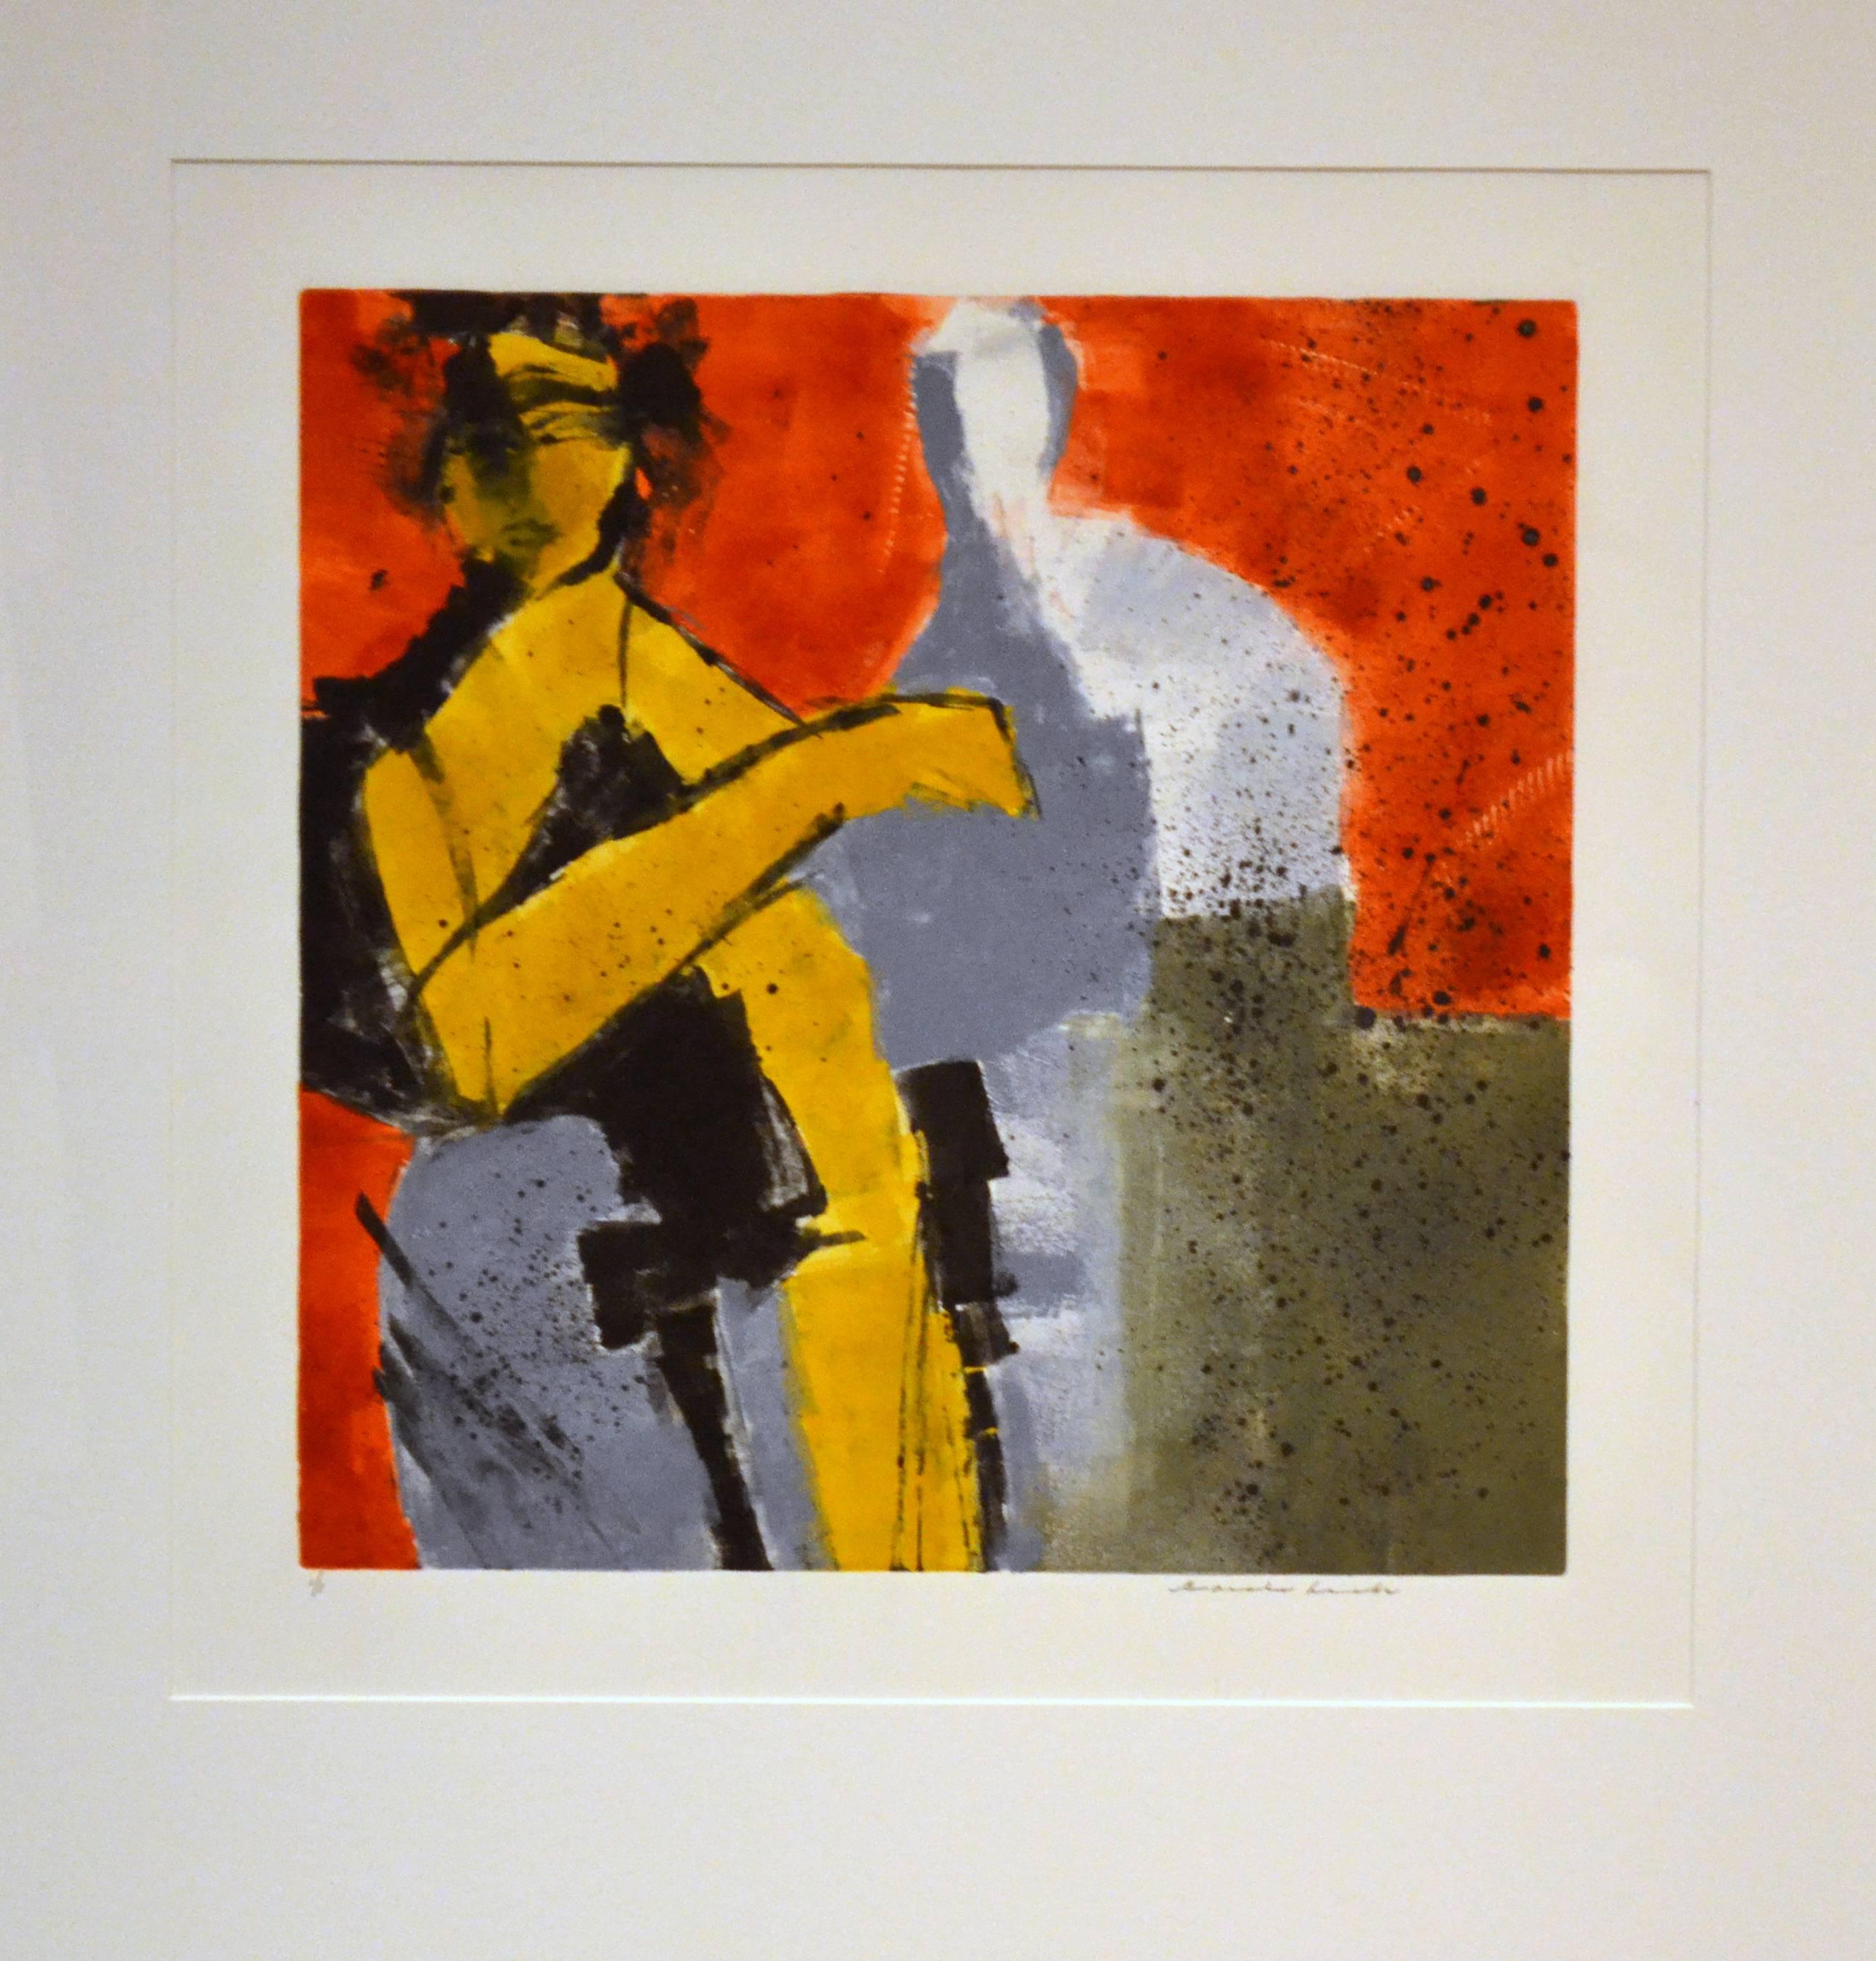 It can be said that artist Carole Hicks is a master at the art of printmaking. Her often colorful and sometimes monochromatic one of a kind prints on paper are highly collected. She is more often recognized for her figurative monoprints, but her